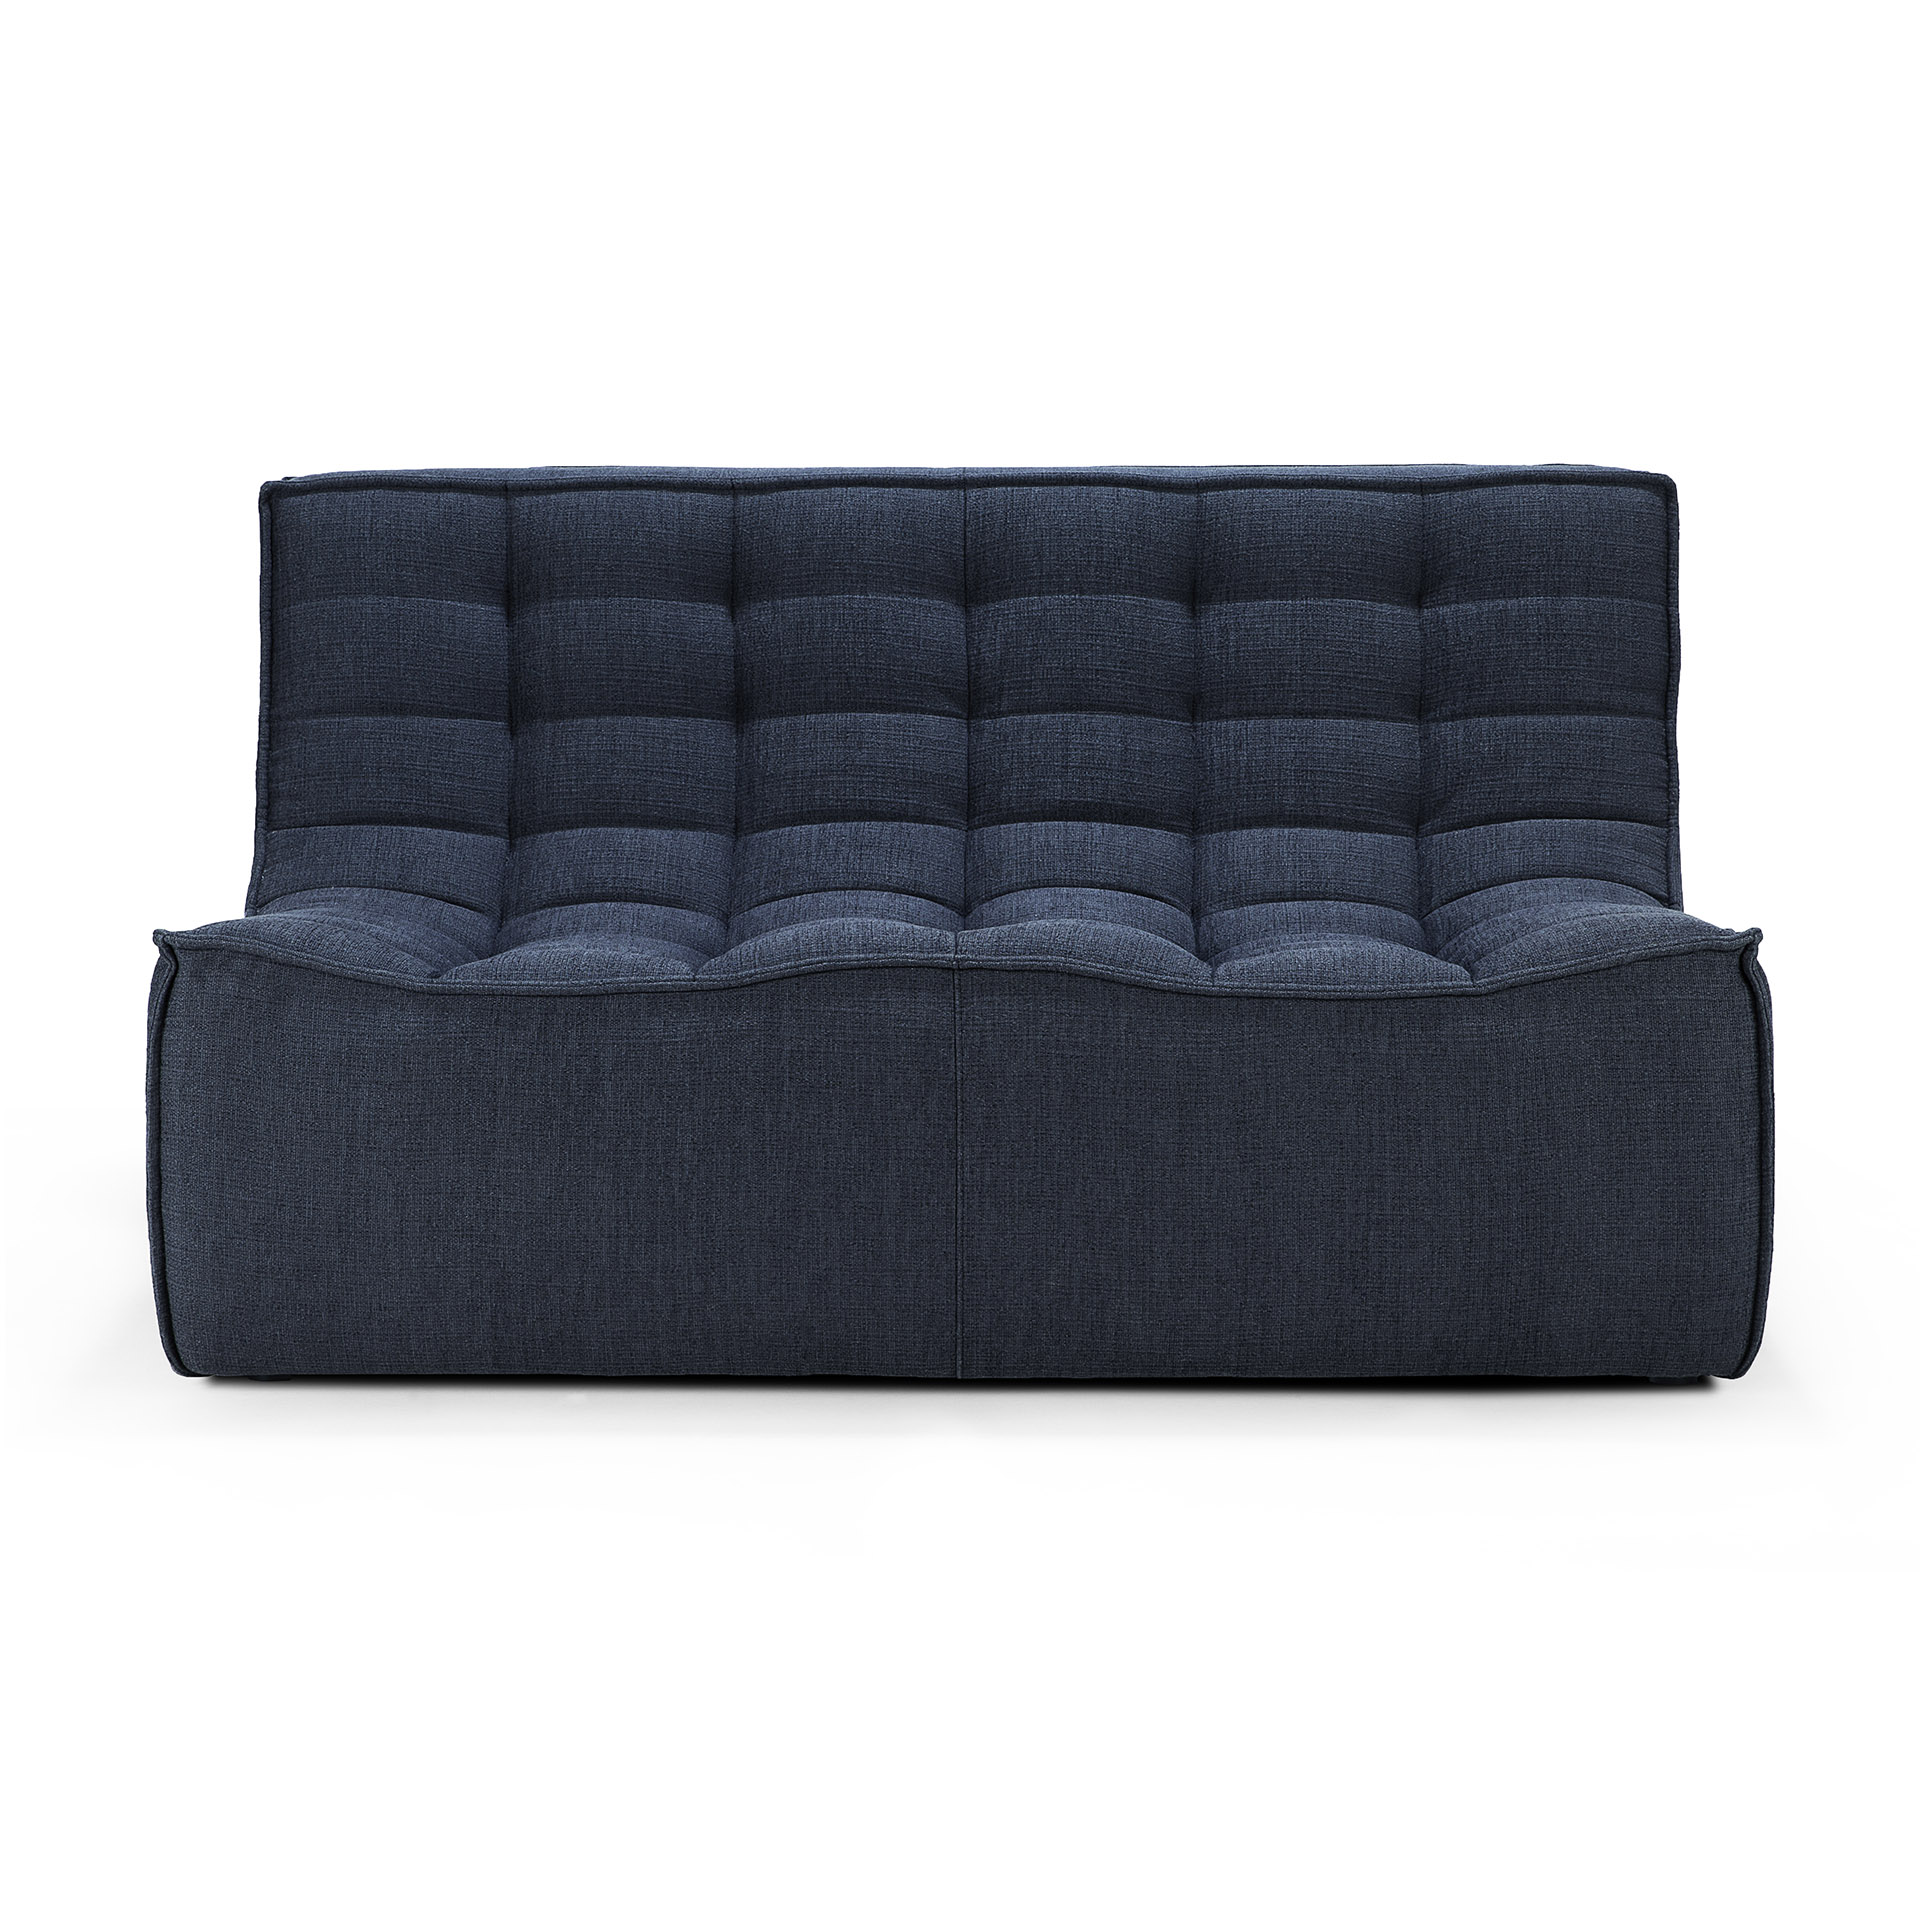 20223_N701_Sofa_2_seater_graphite_front_cut_web-1